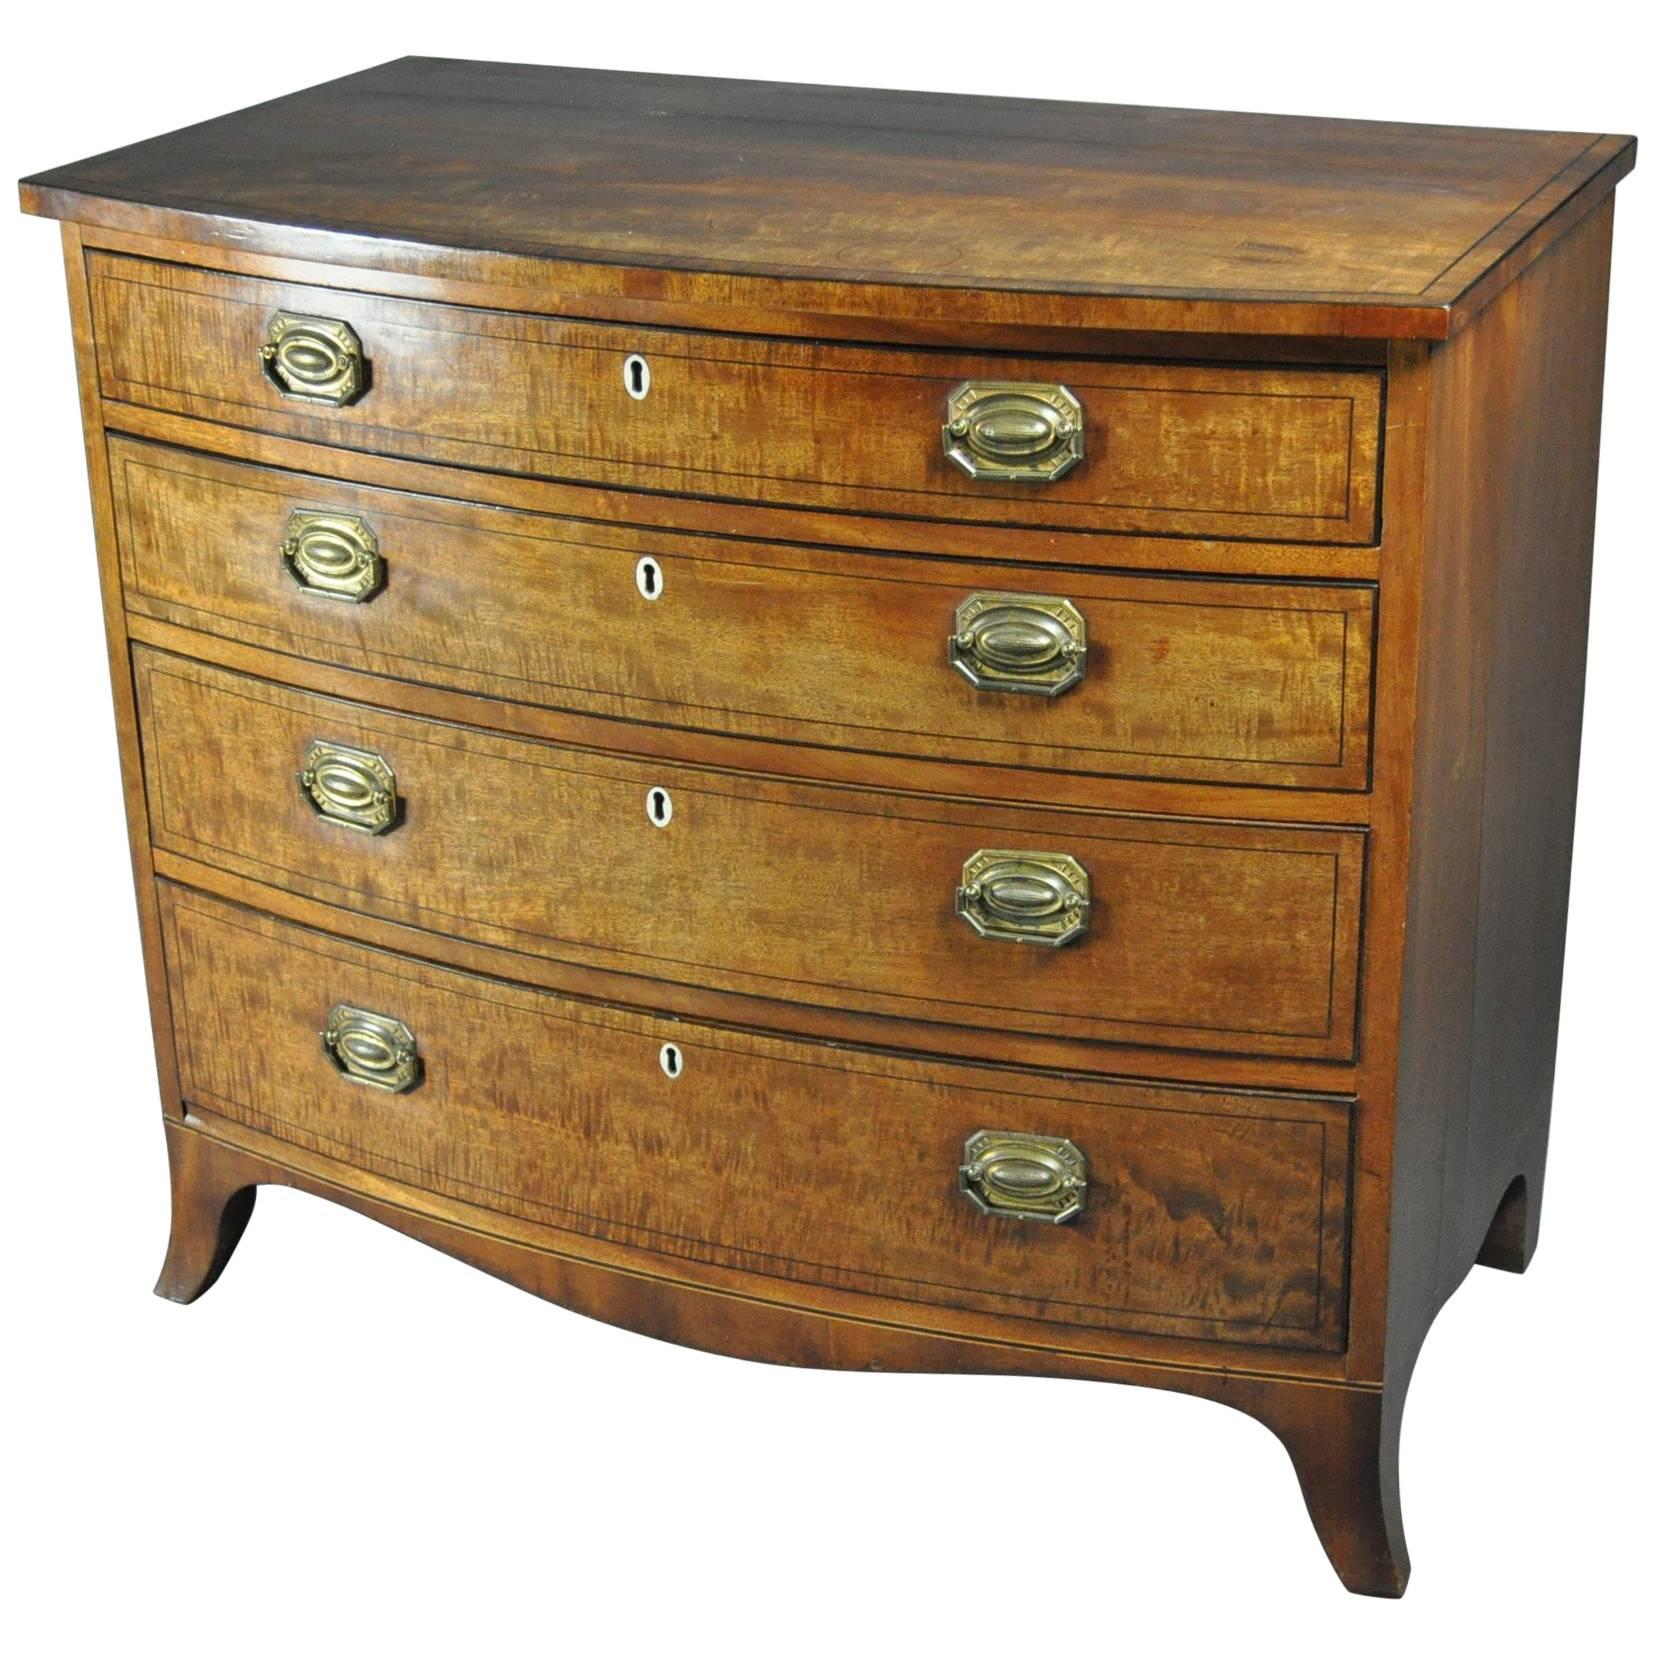 George III Mahogany Bow Fronted Chest of Drawers